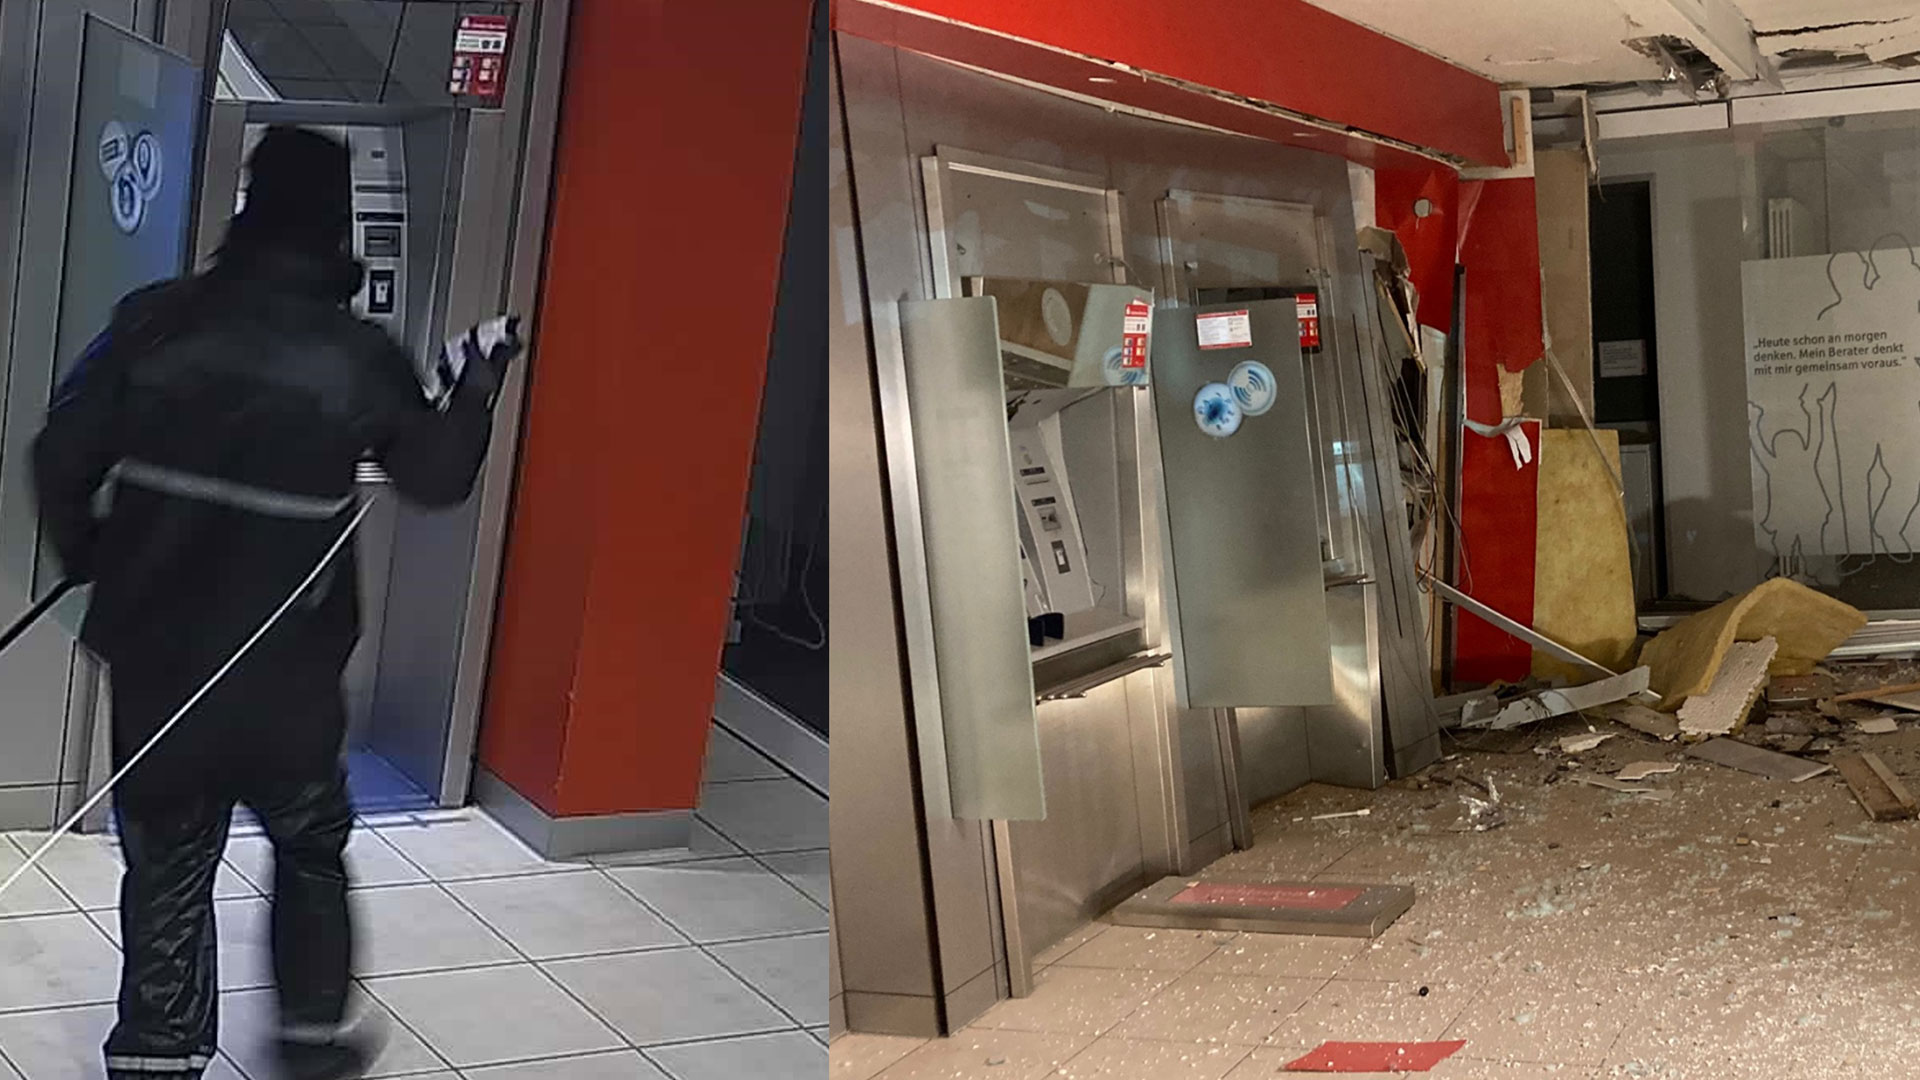 ATM blaster and ATM blown up in building